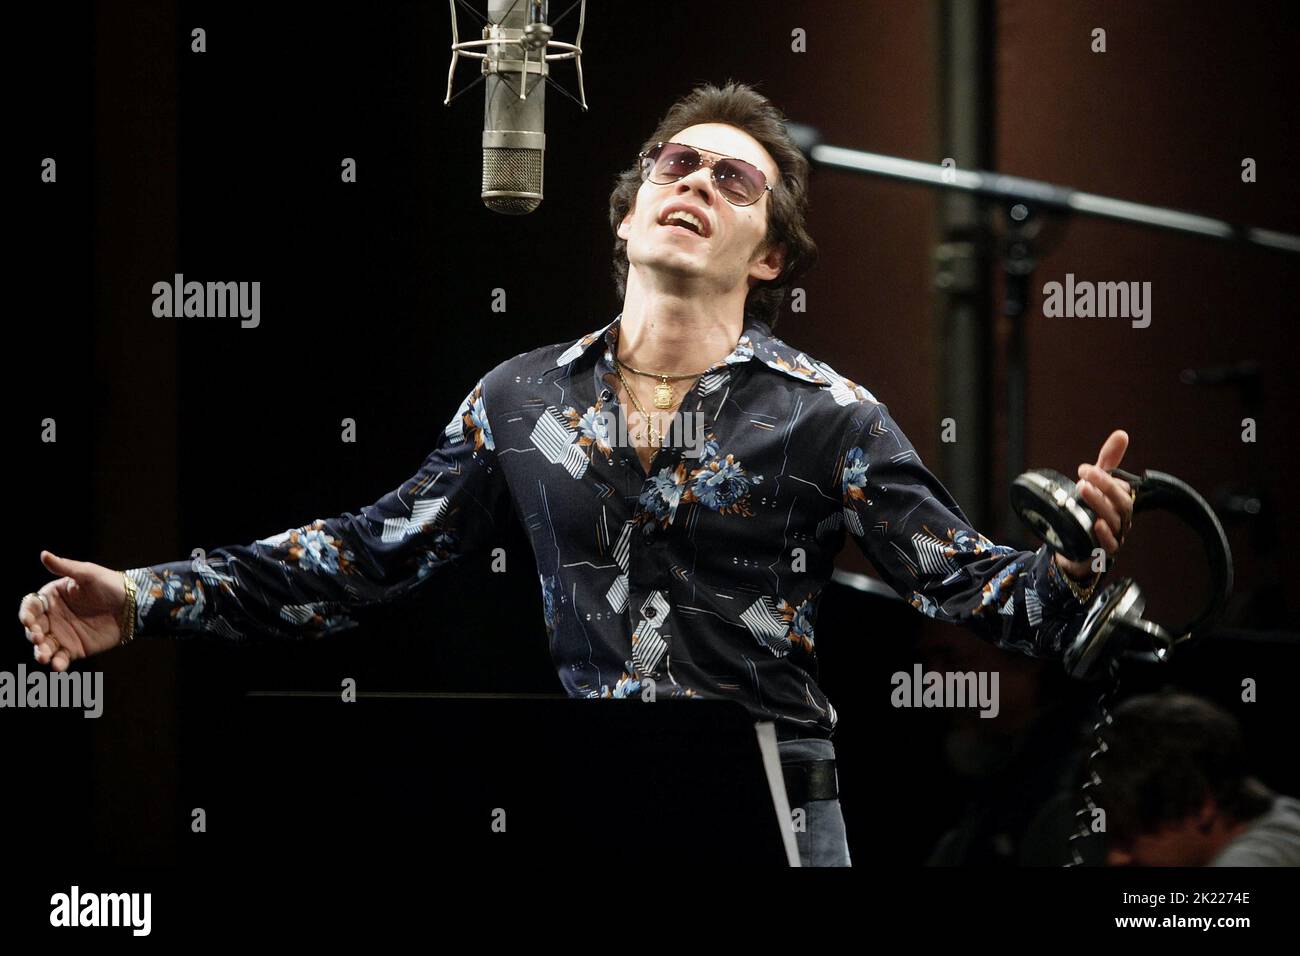 MARC ANTHONY, EL CANTANTE, 2006 Stock Photo